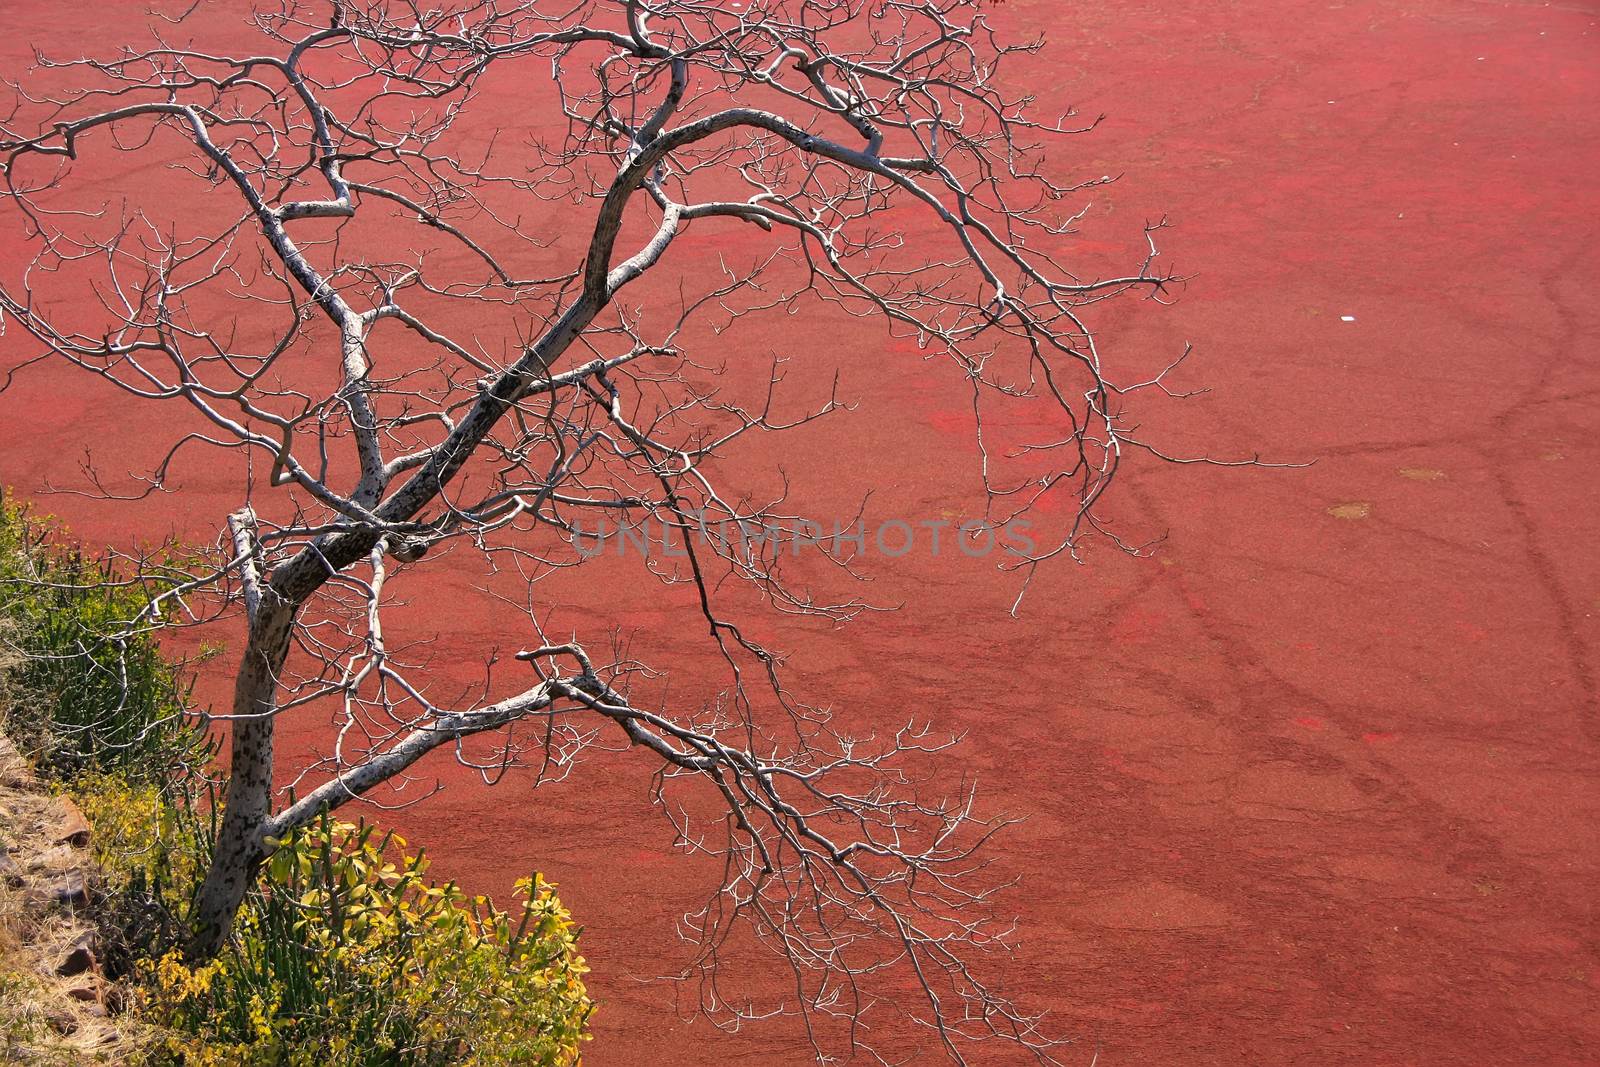 Tree without leaves against red pond, Ranthambore Fort, Rajasthan, India